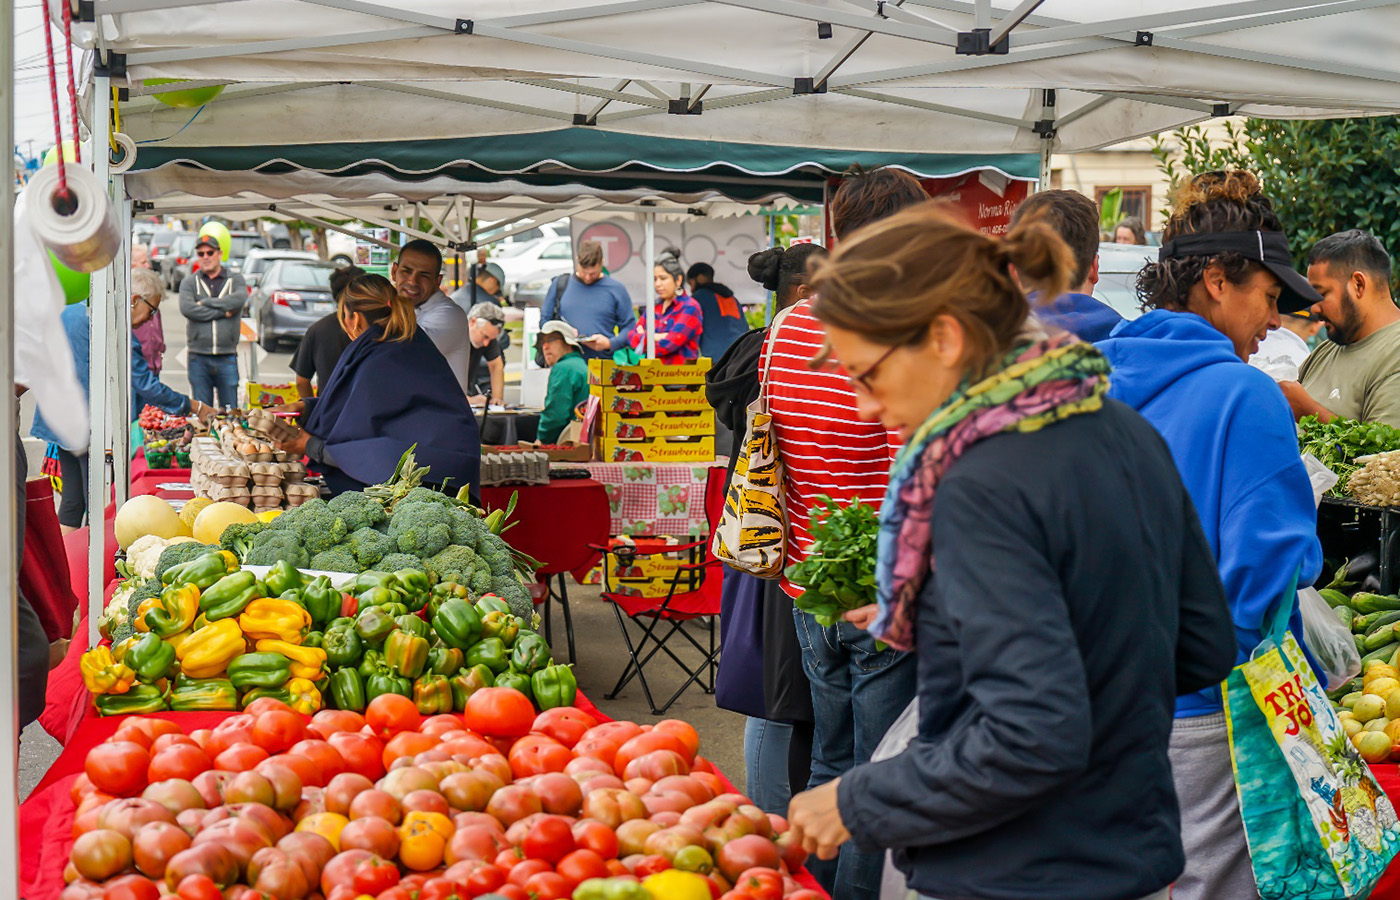 Image of a farmers market. Photo Credit: Dale Cruse / Flickr